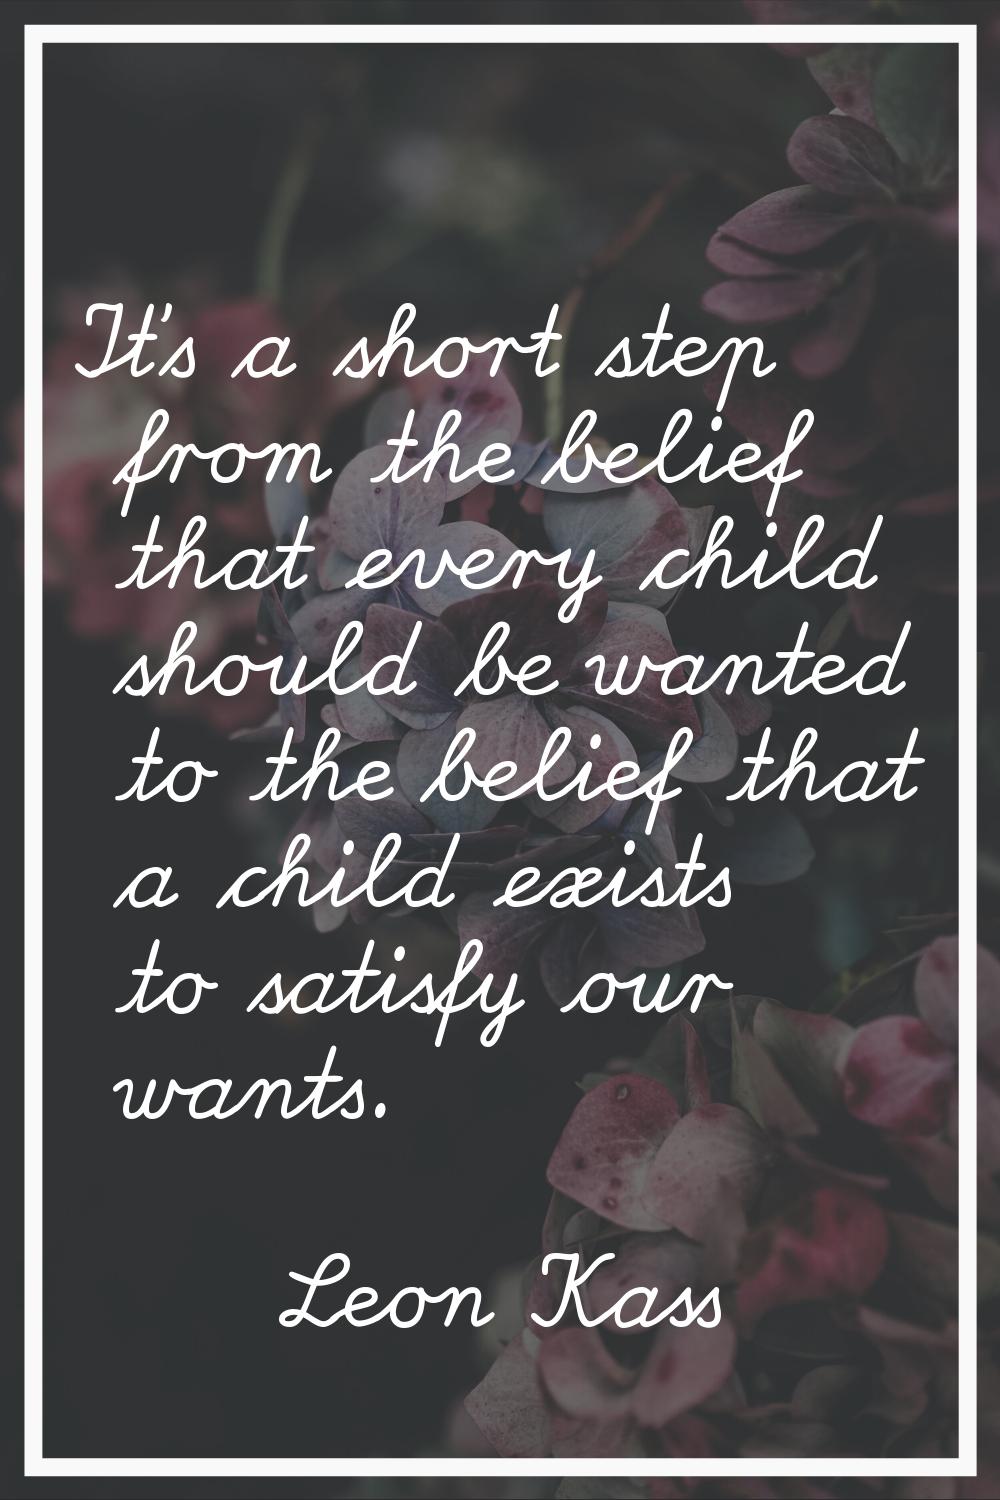 It's a short step from the belief that every child should be wanted to the belief that a child exis